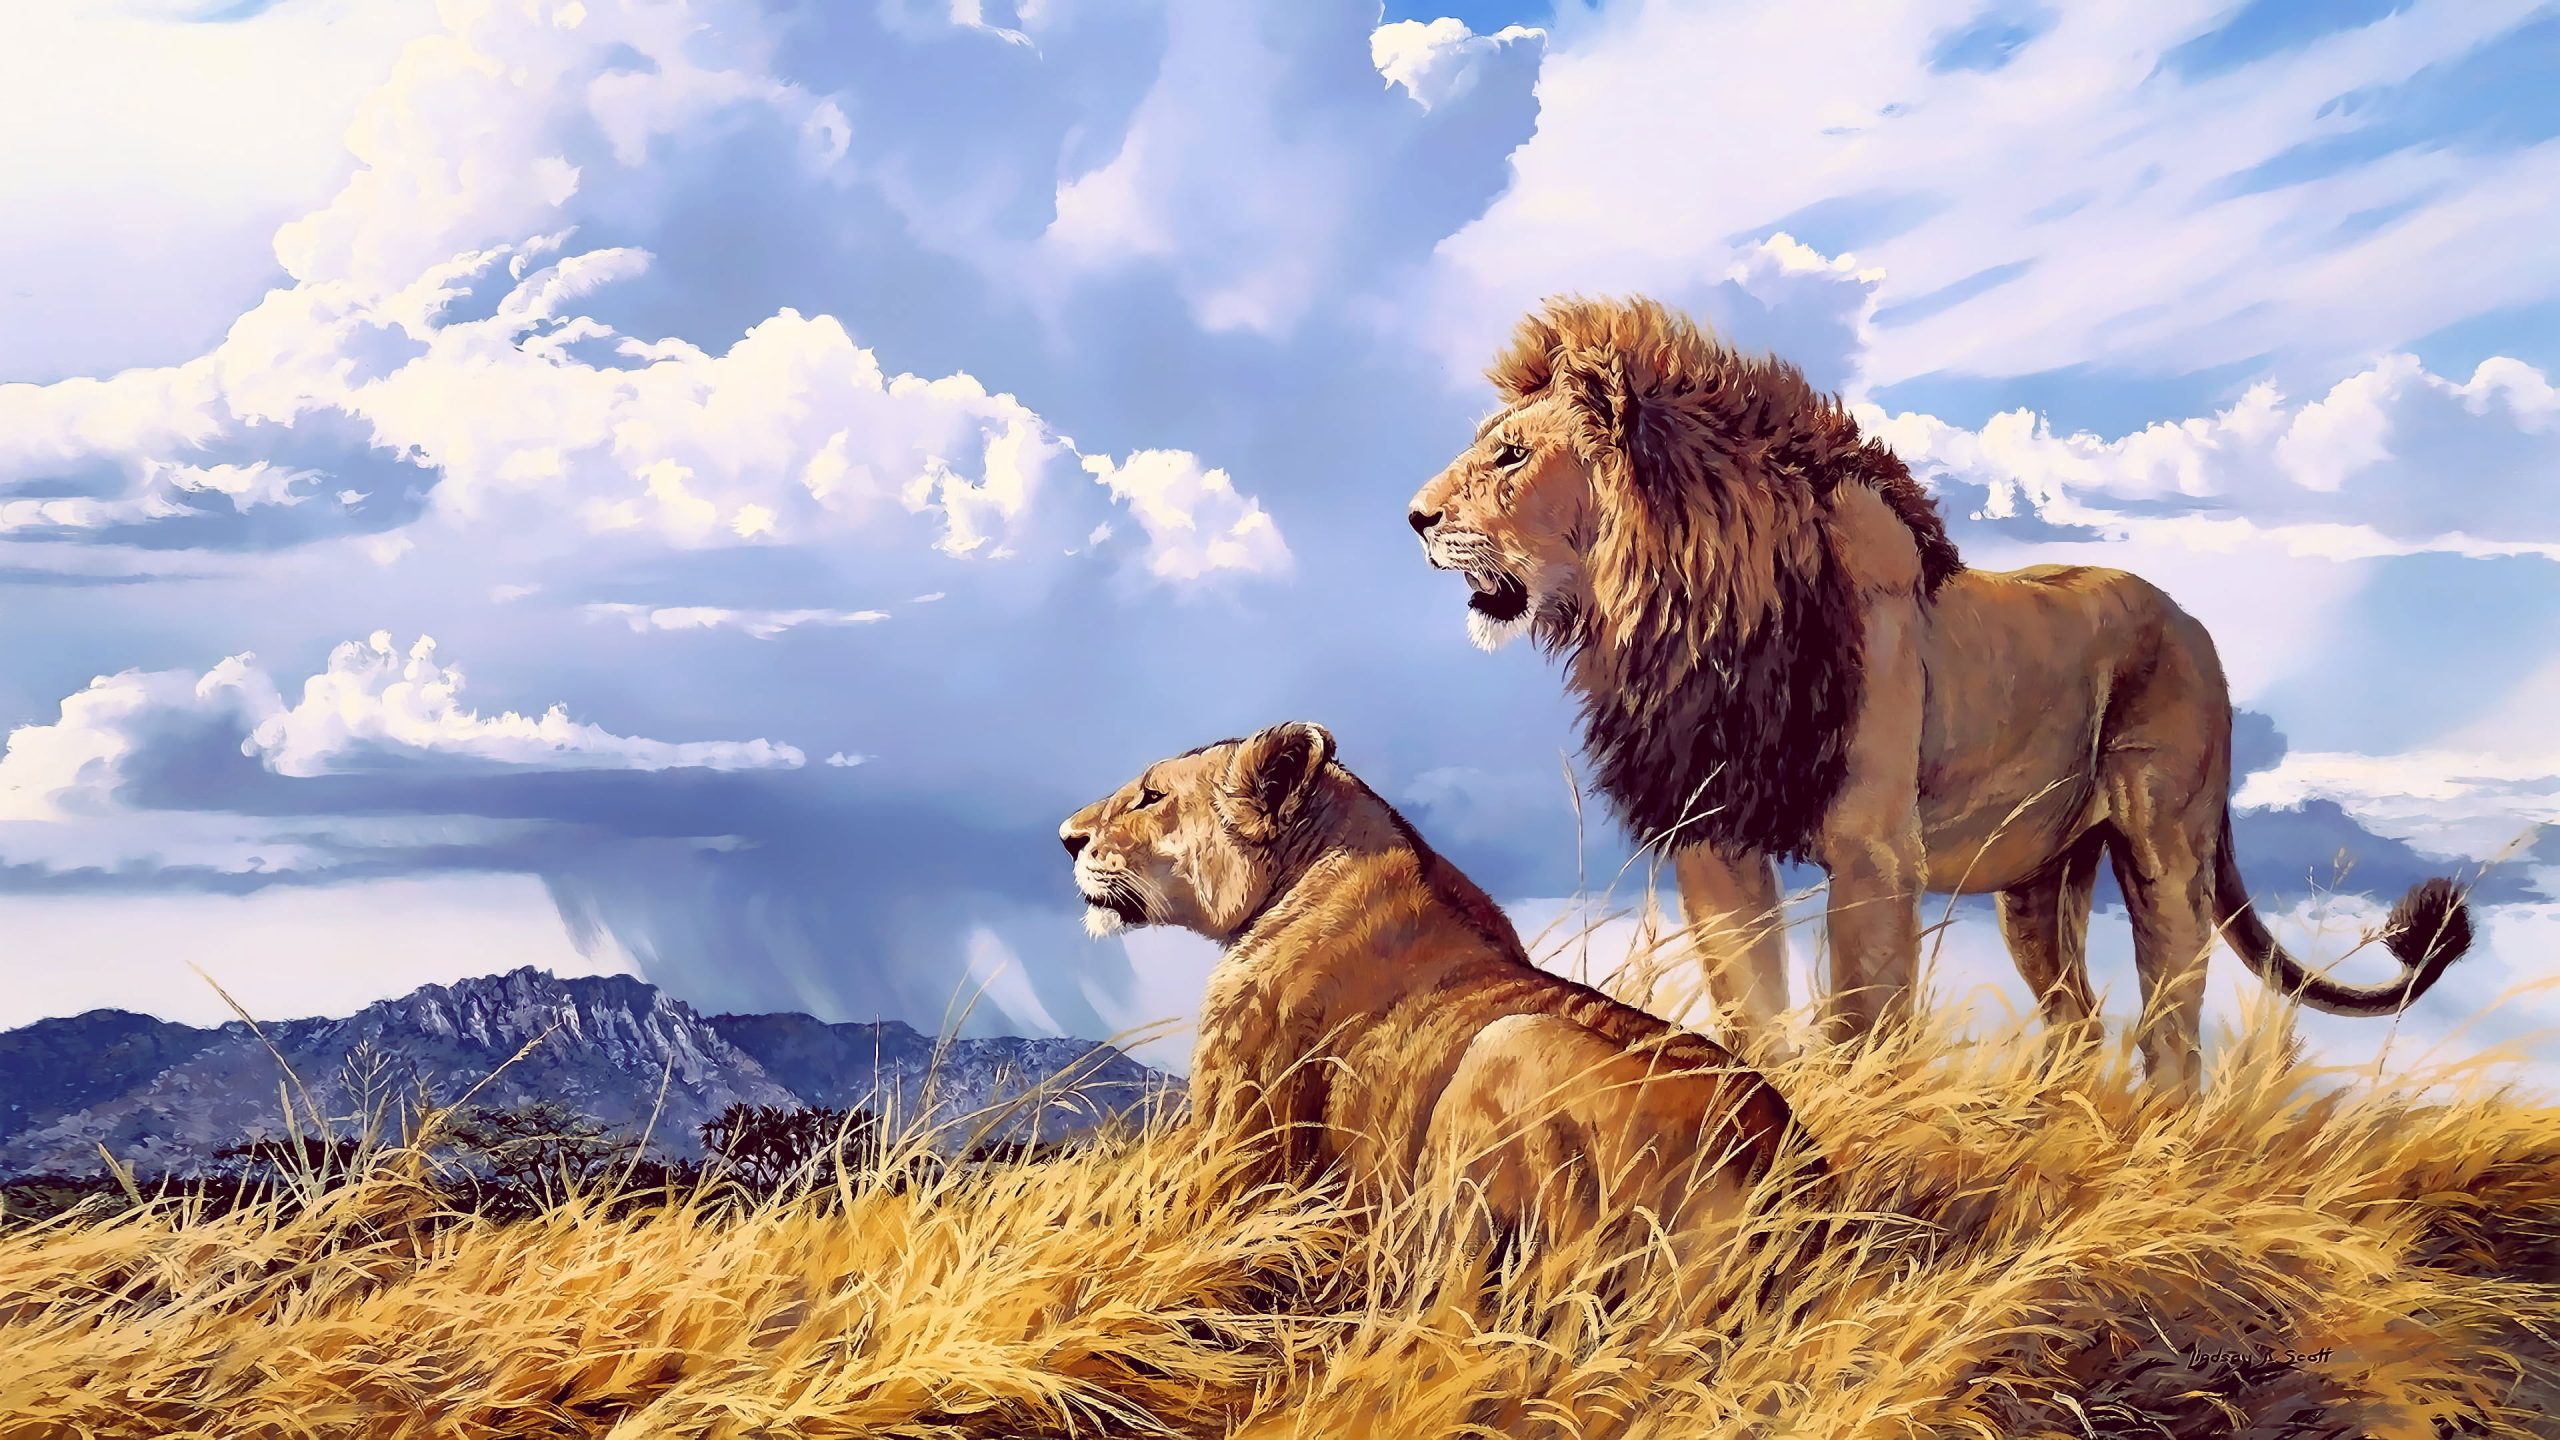 Lion and lioness wallpaper, animals, artwork, nature, big cats, clouds